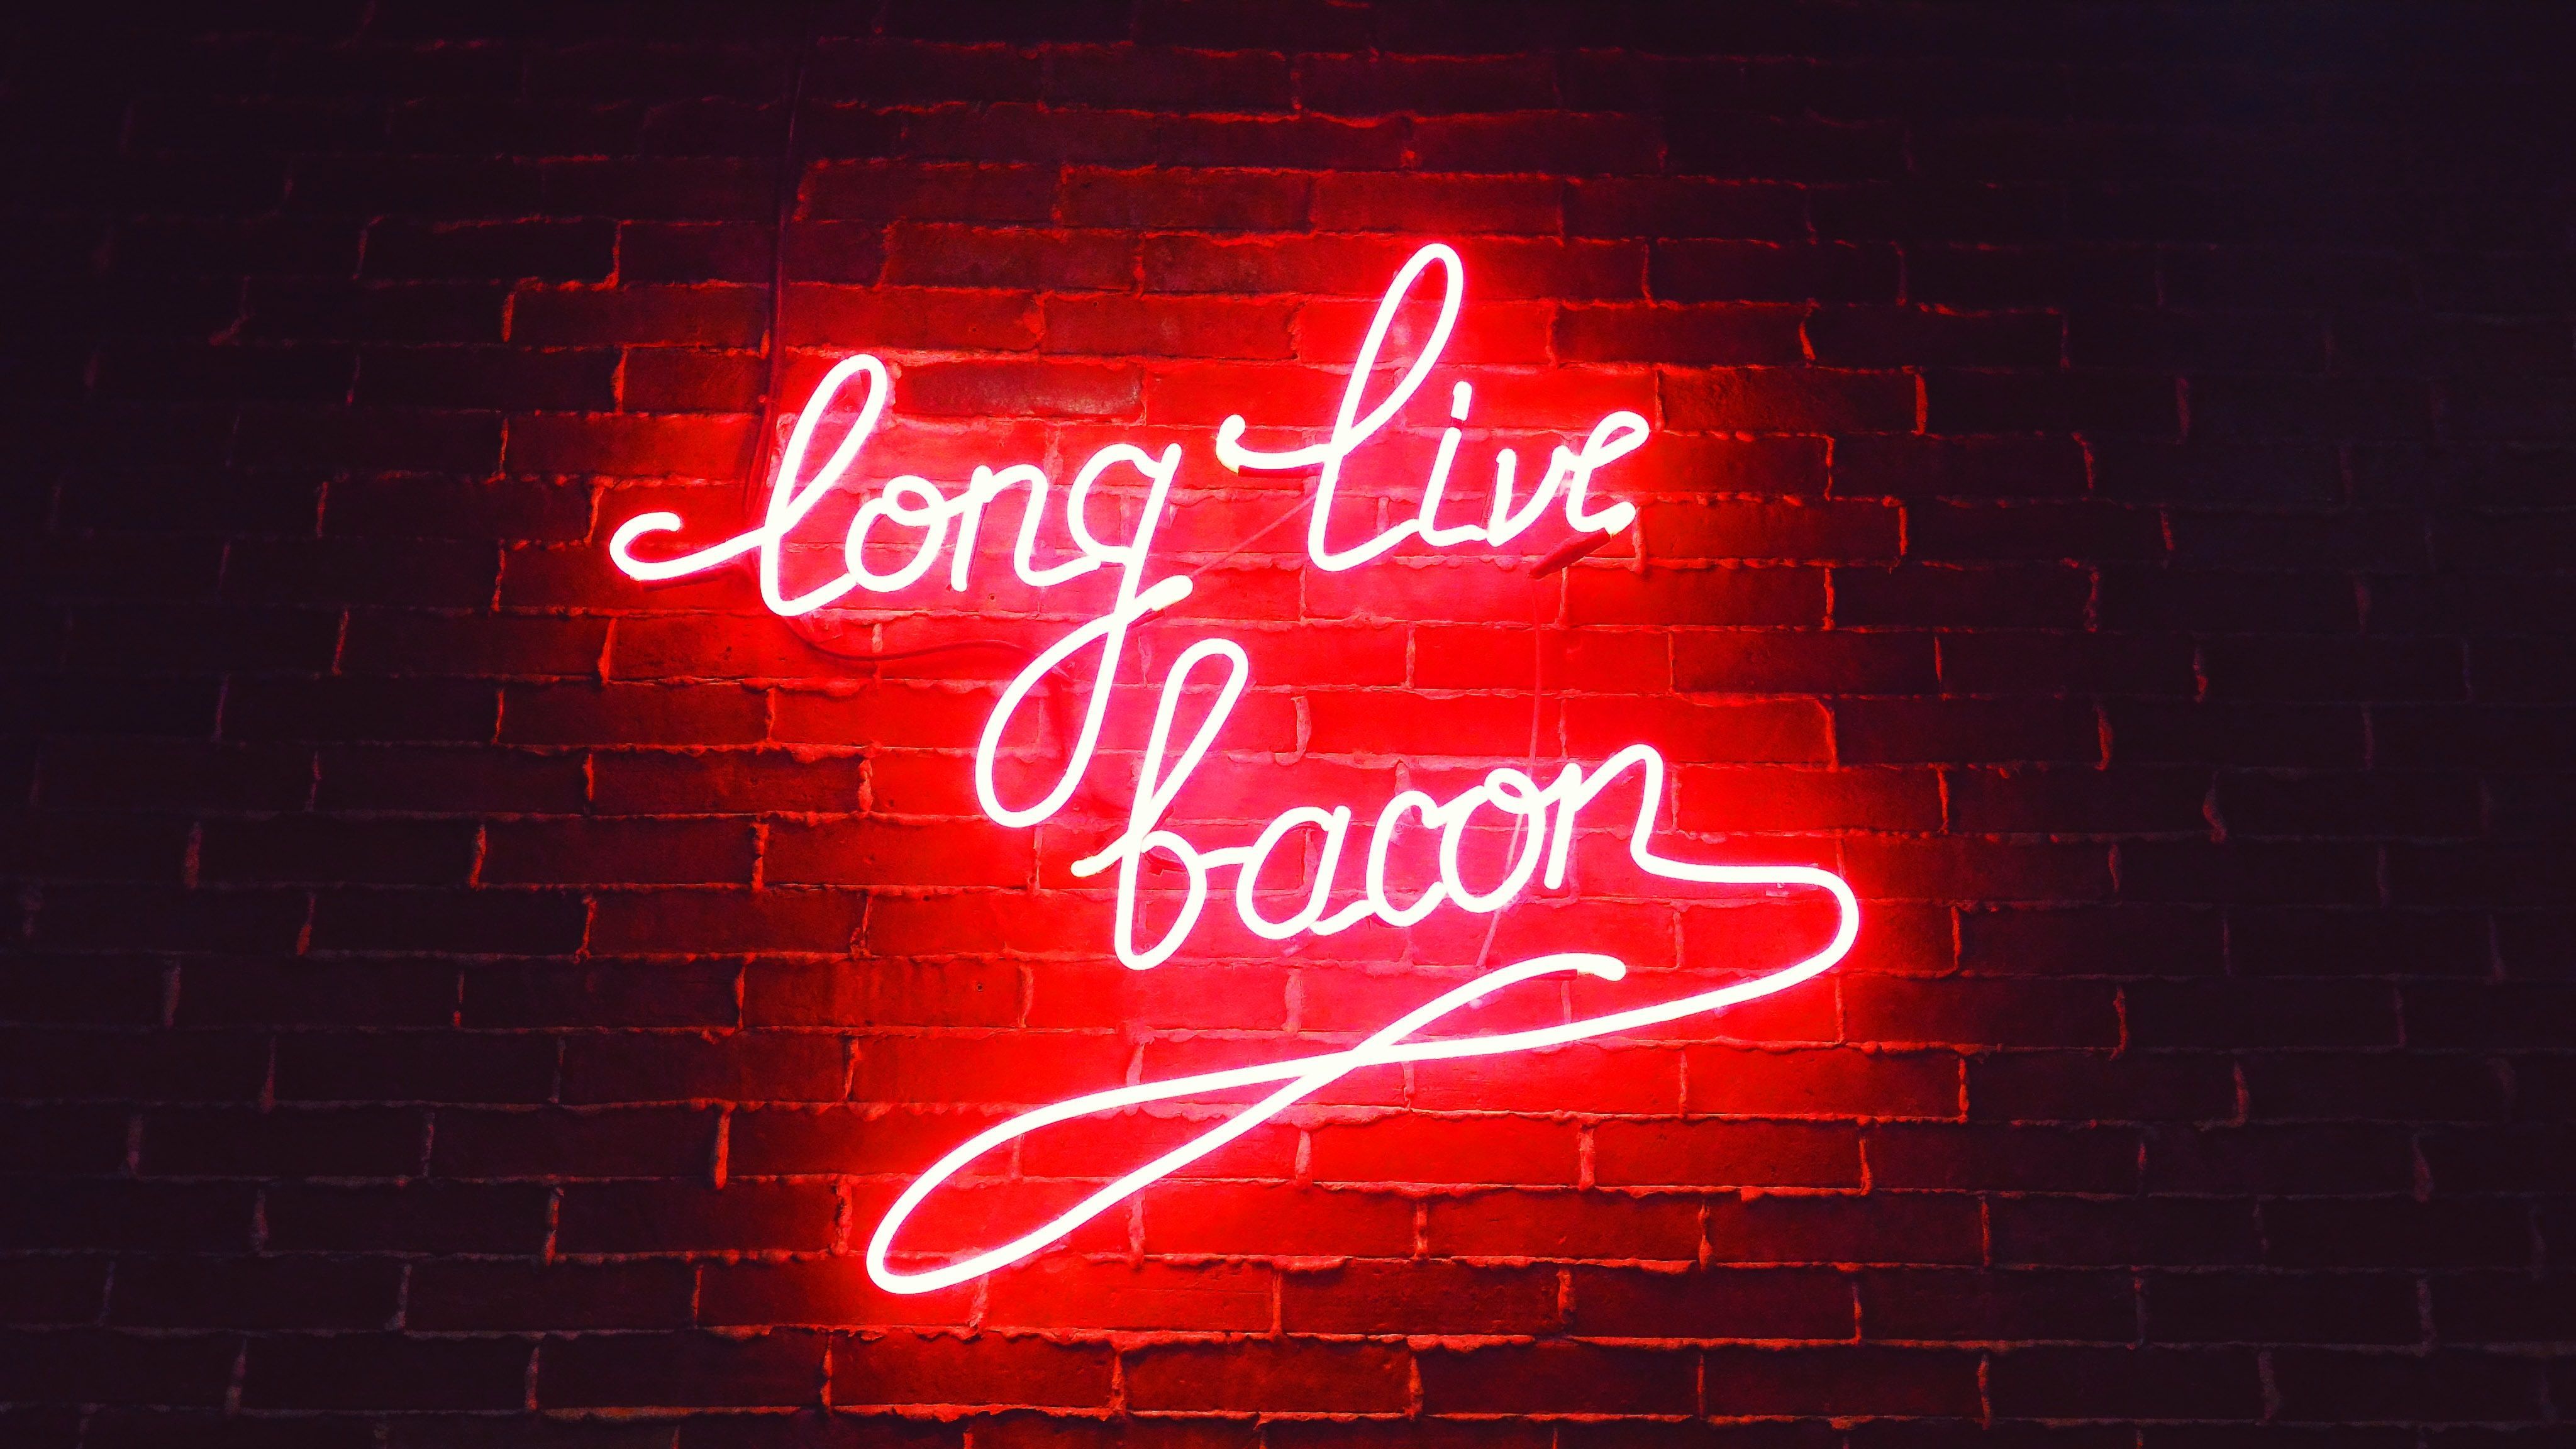 Neon Sign Wallpapers